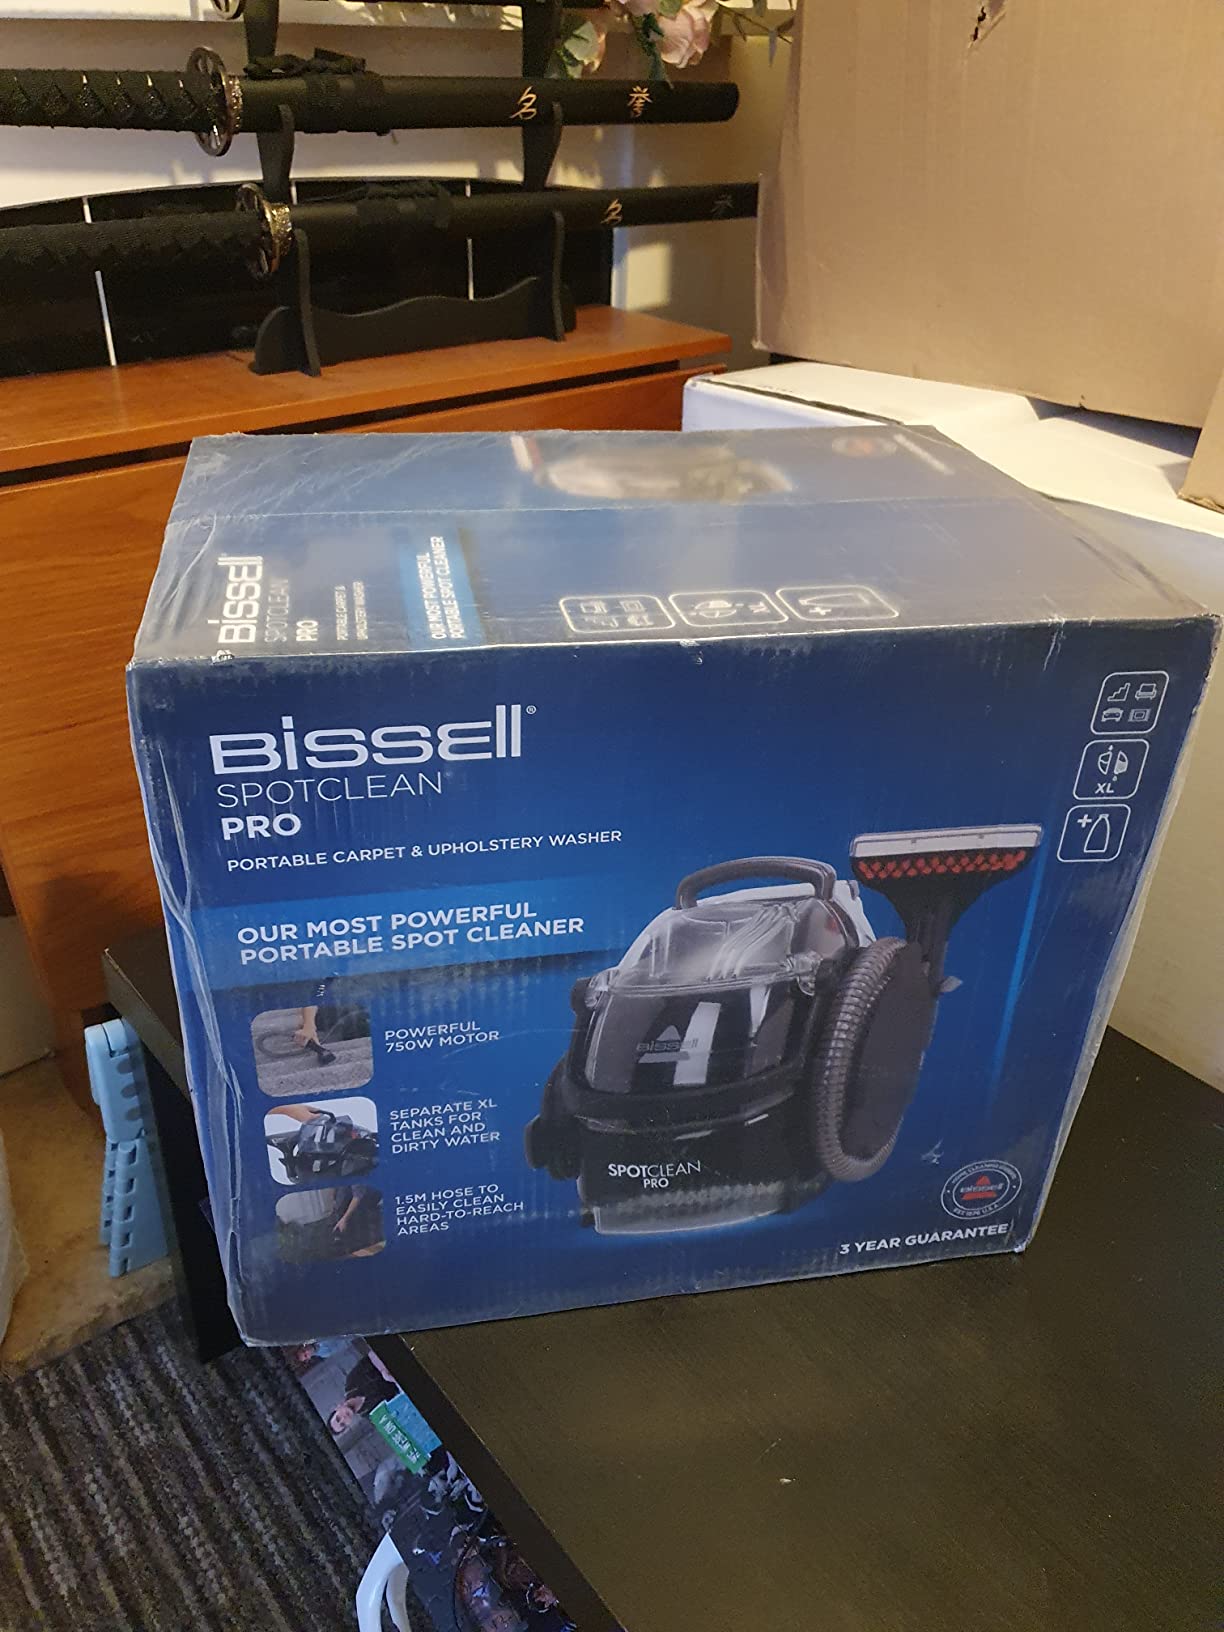  Bissell spotclean pro portable carpet cleaner 1558